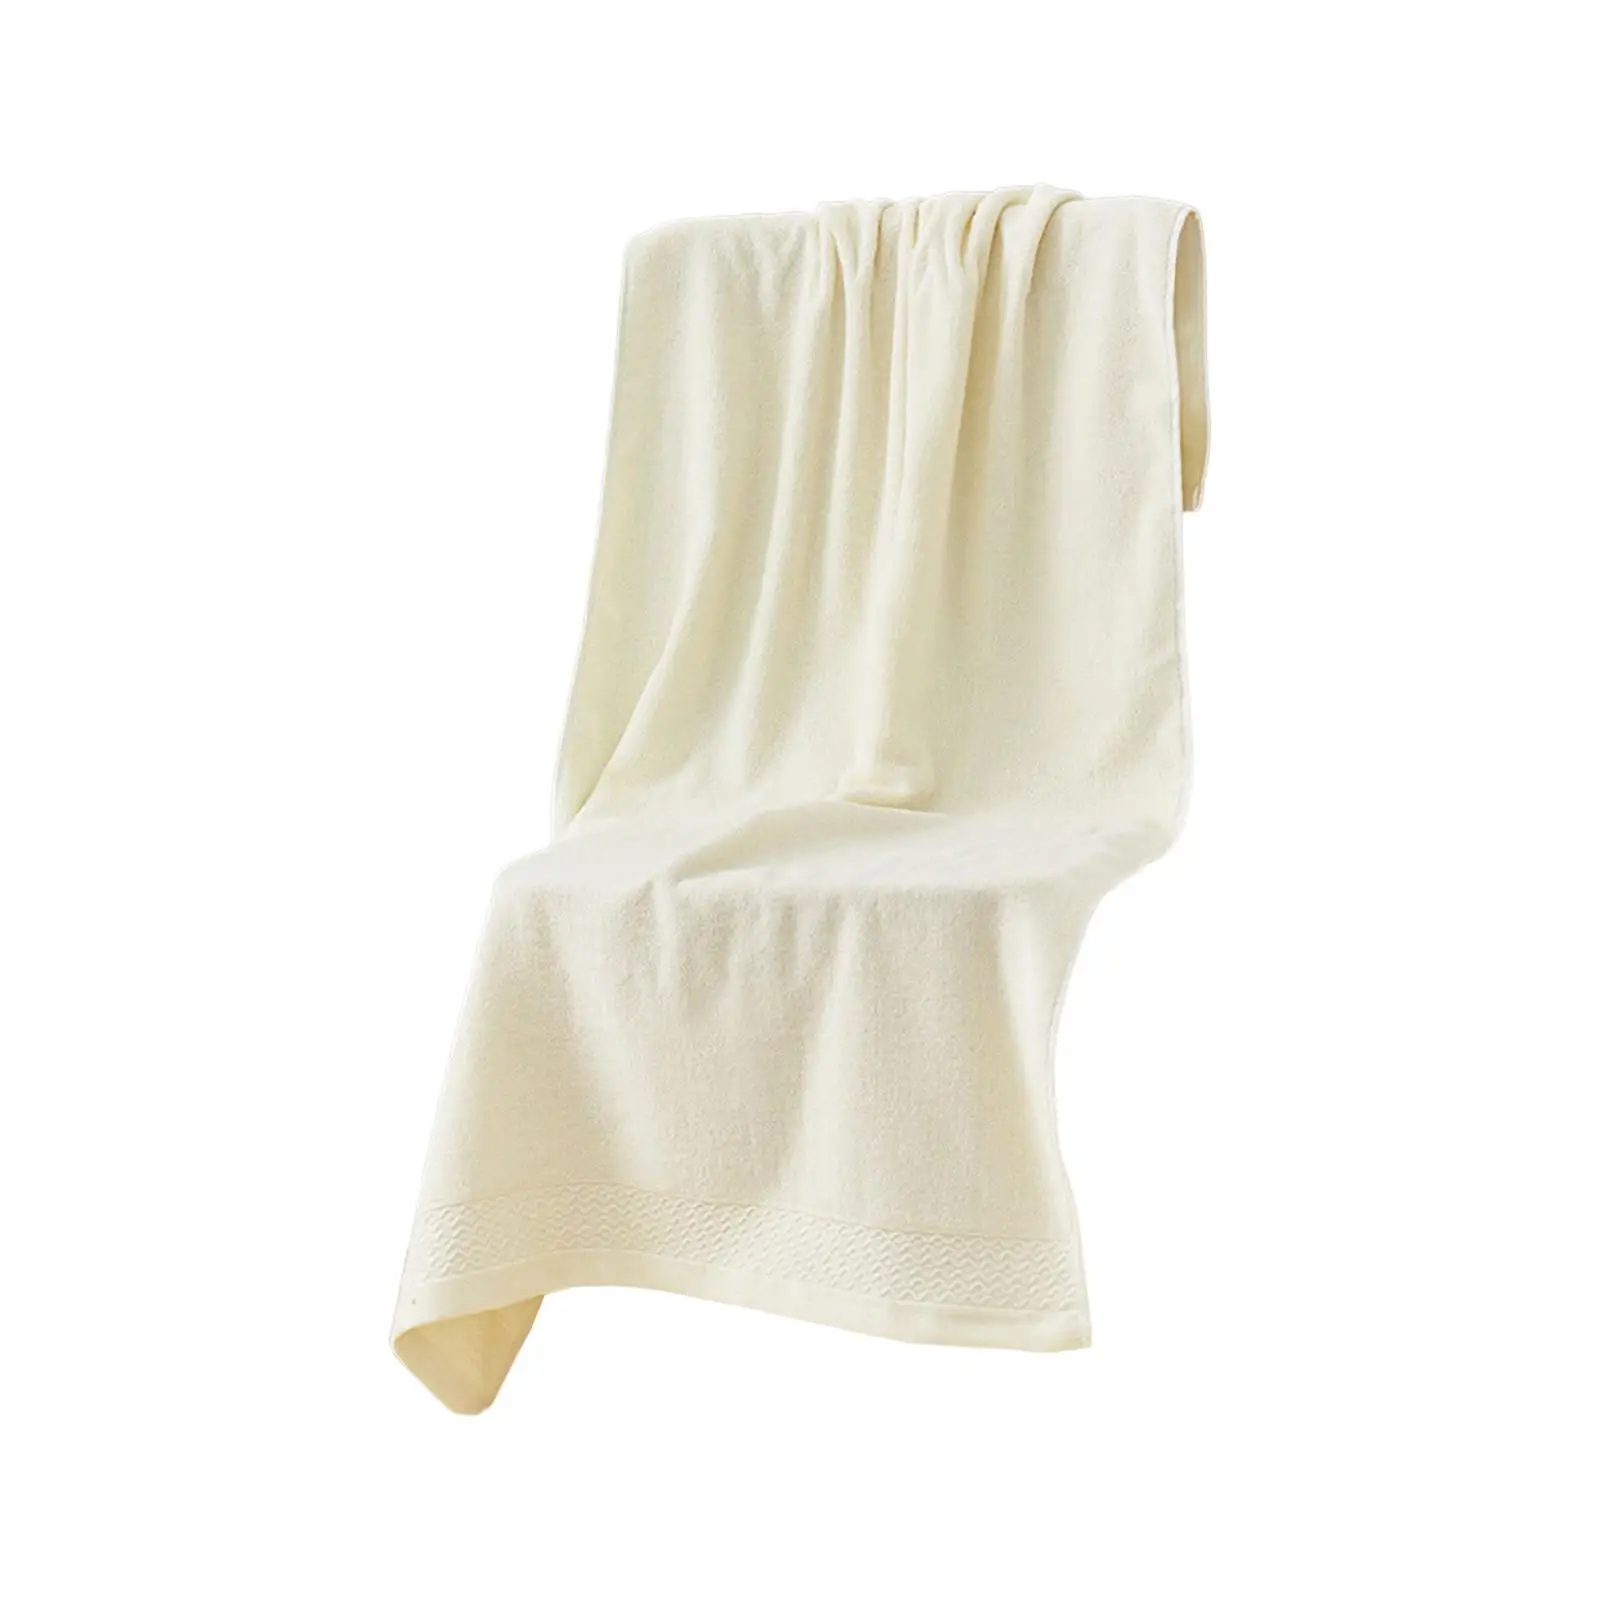 Bath Towels Quick Drying Highly Absorbent Camping Blanket Beach Towels for Guests Beach Travel Salon Bathroom